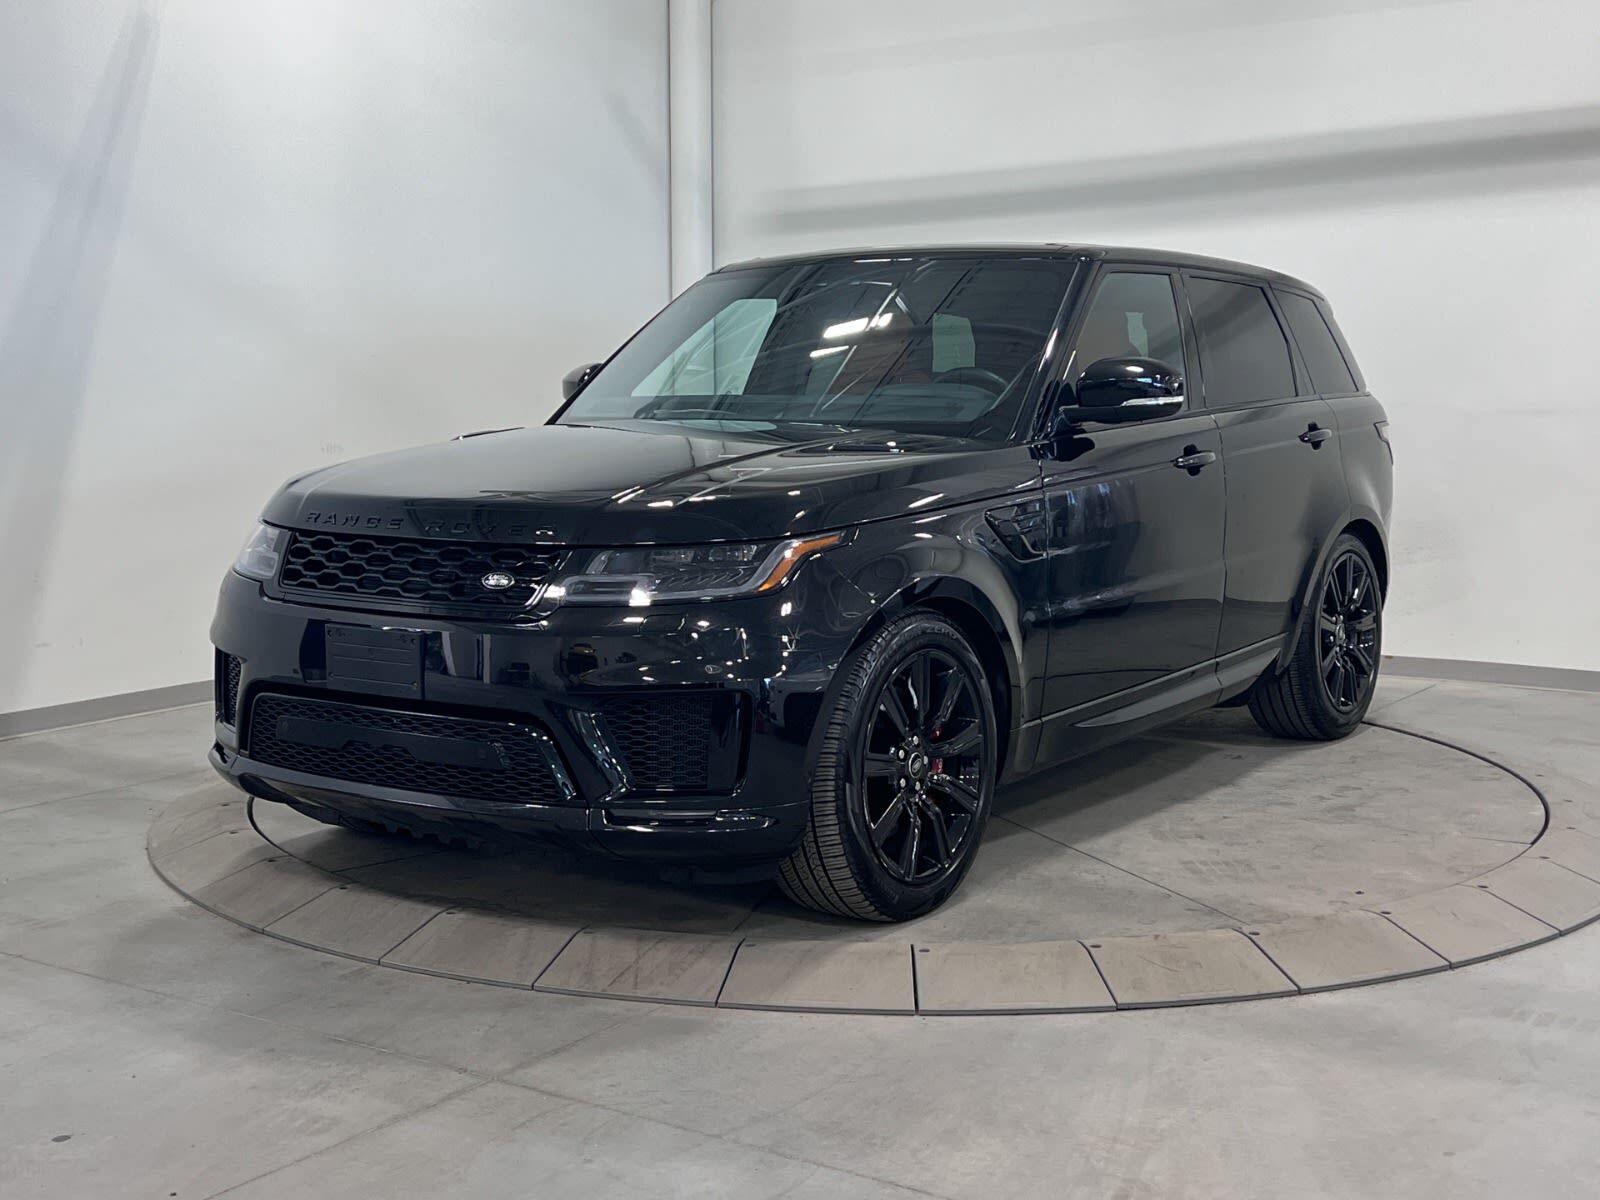 2022 Land Rover Range Rover Sport DEMO SALE EVENT ON NOW!